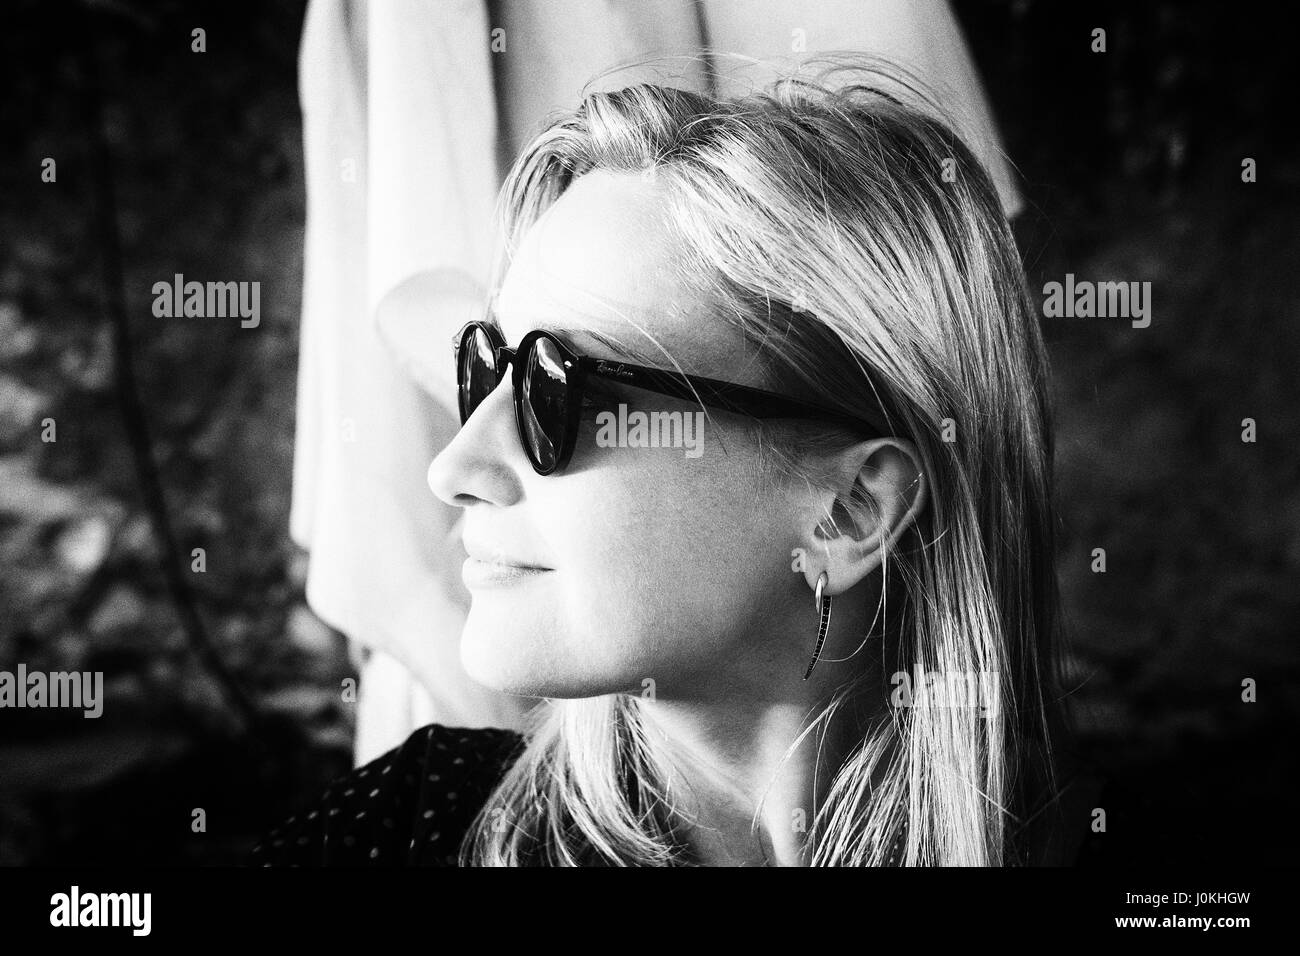 Young Woman in Sunglasses and earrings Stock Photo